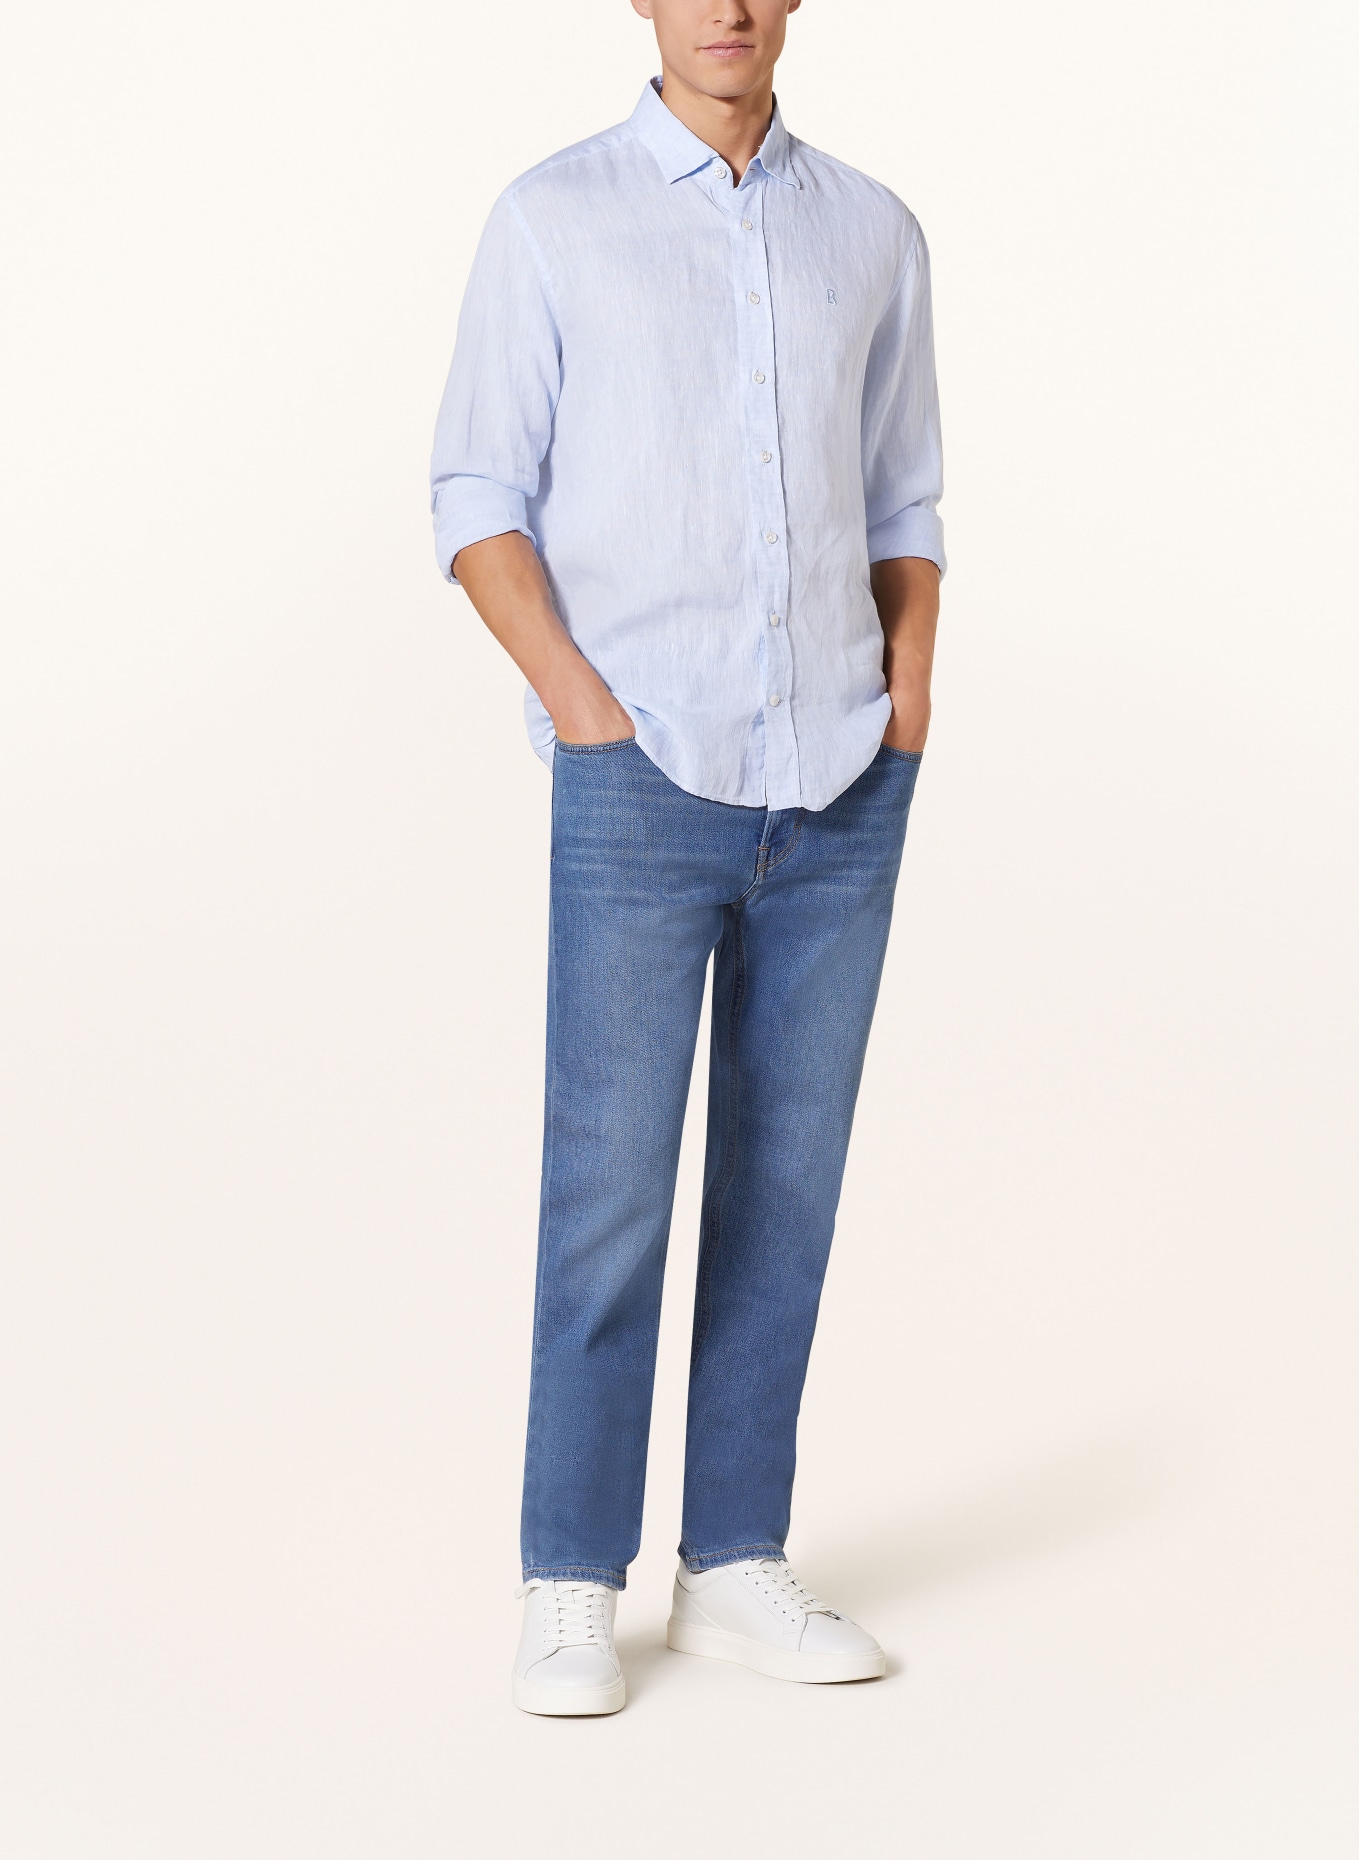 BOGNER Jeans BRIAN Tapered Fit, Farbe: 414 smokey blue (Bild 2)